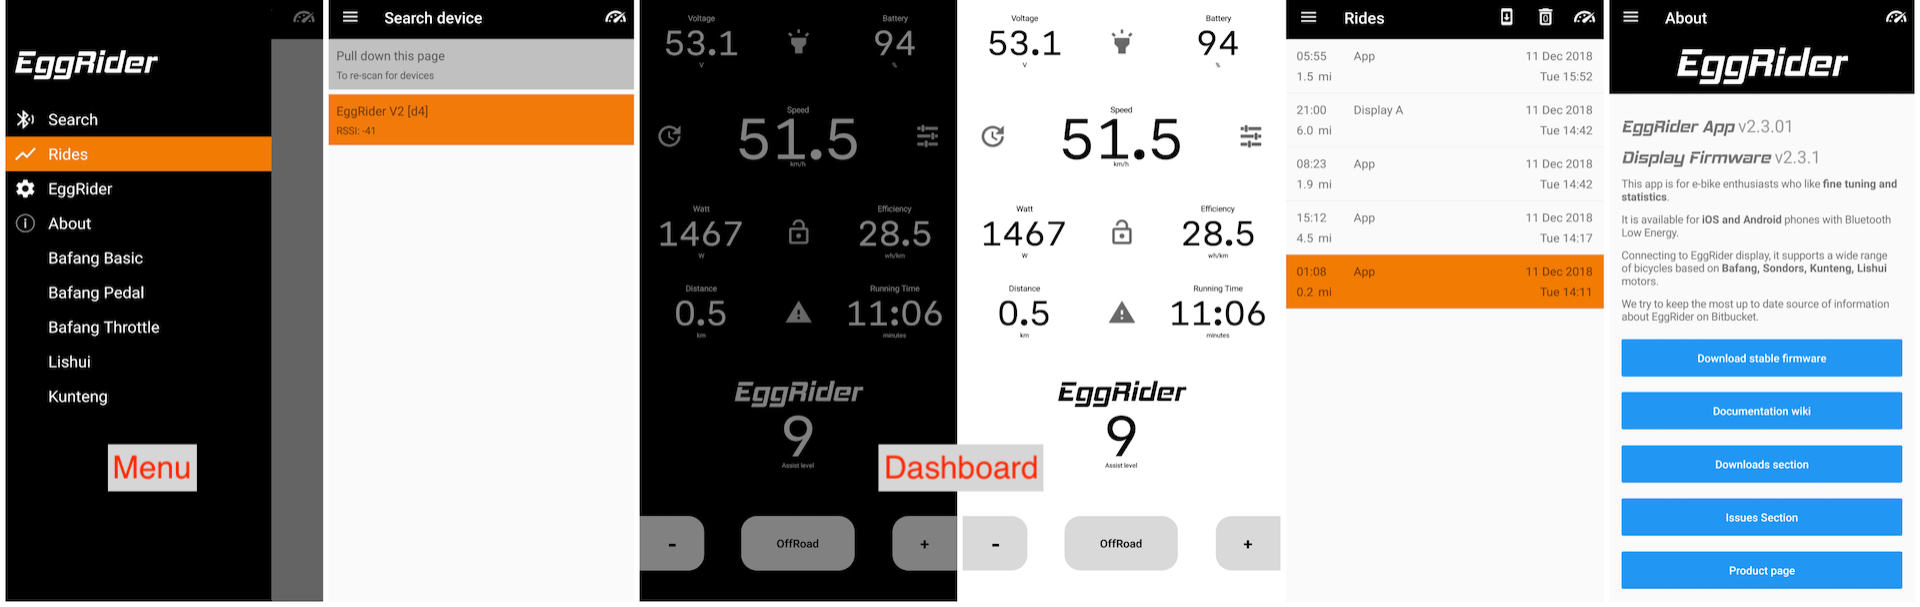 EggRider app overview main pages